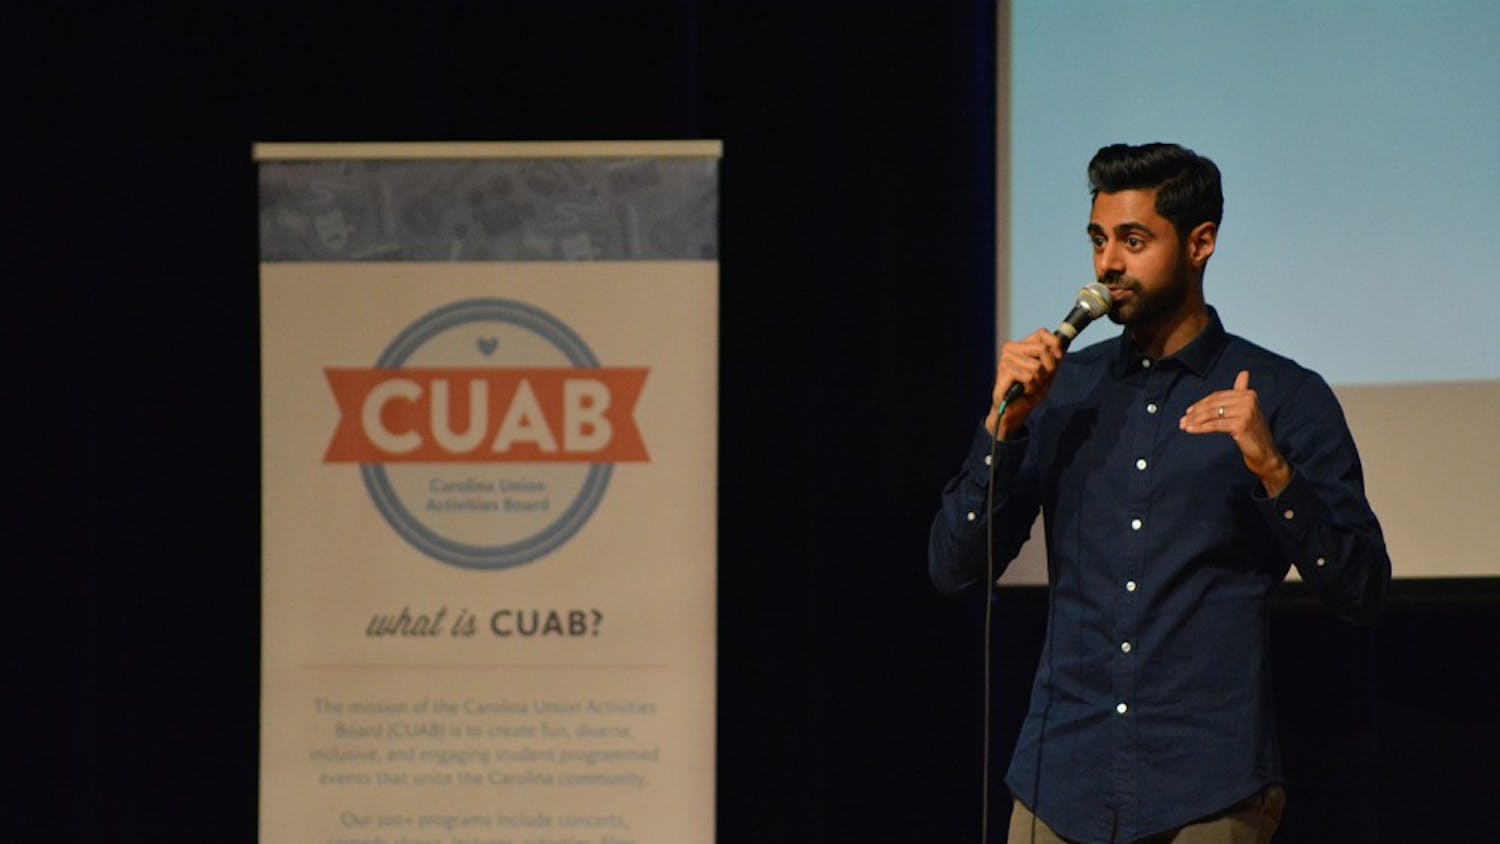 Hasan Minhaj of The Daily Show talks about the election results from the Muslim perspective on Saturday night in the Great Hall.The UNC Muslim Students Association worked with the Carolina Union Activities Board to hold the event. 